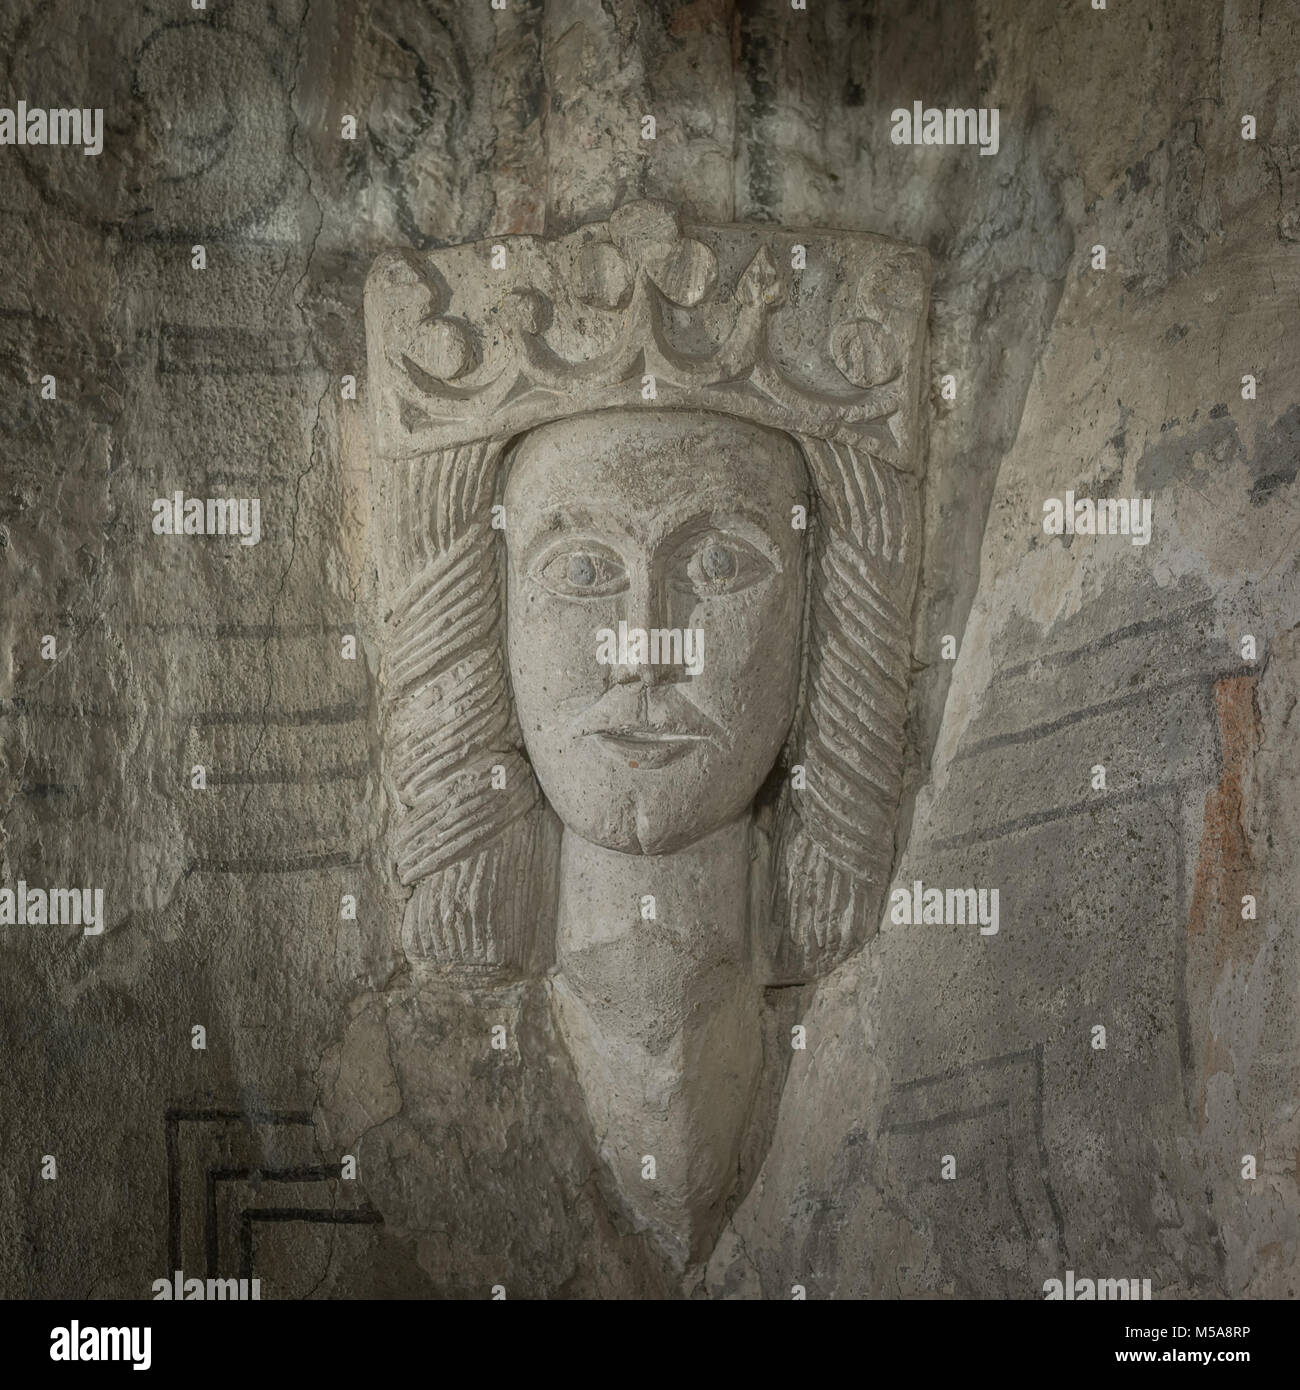 Medieval Stone sculptur of a Queen with a crown, in the vault of Ronneby church. Probably  Margareta Valdemarsdotter, Ronneby, Sweden, December 6, 201 Stock Photo